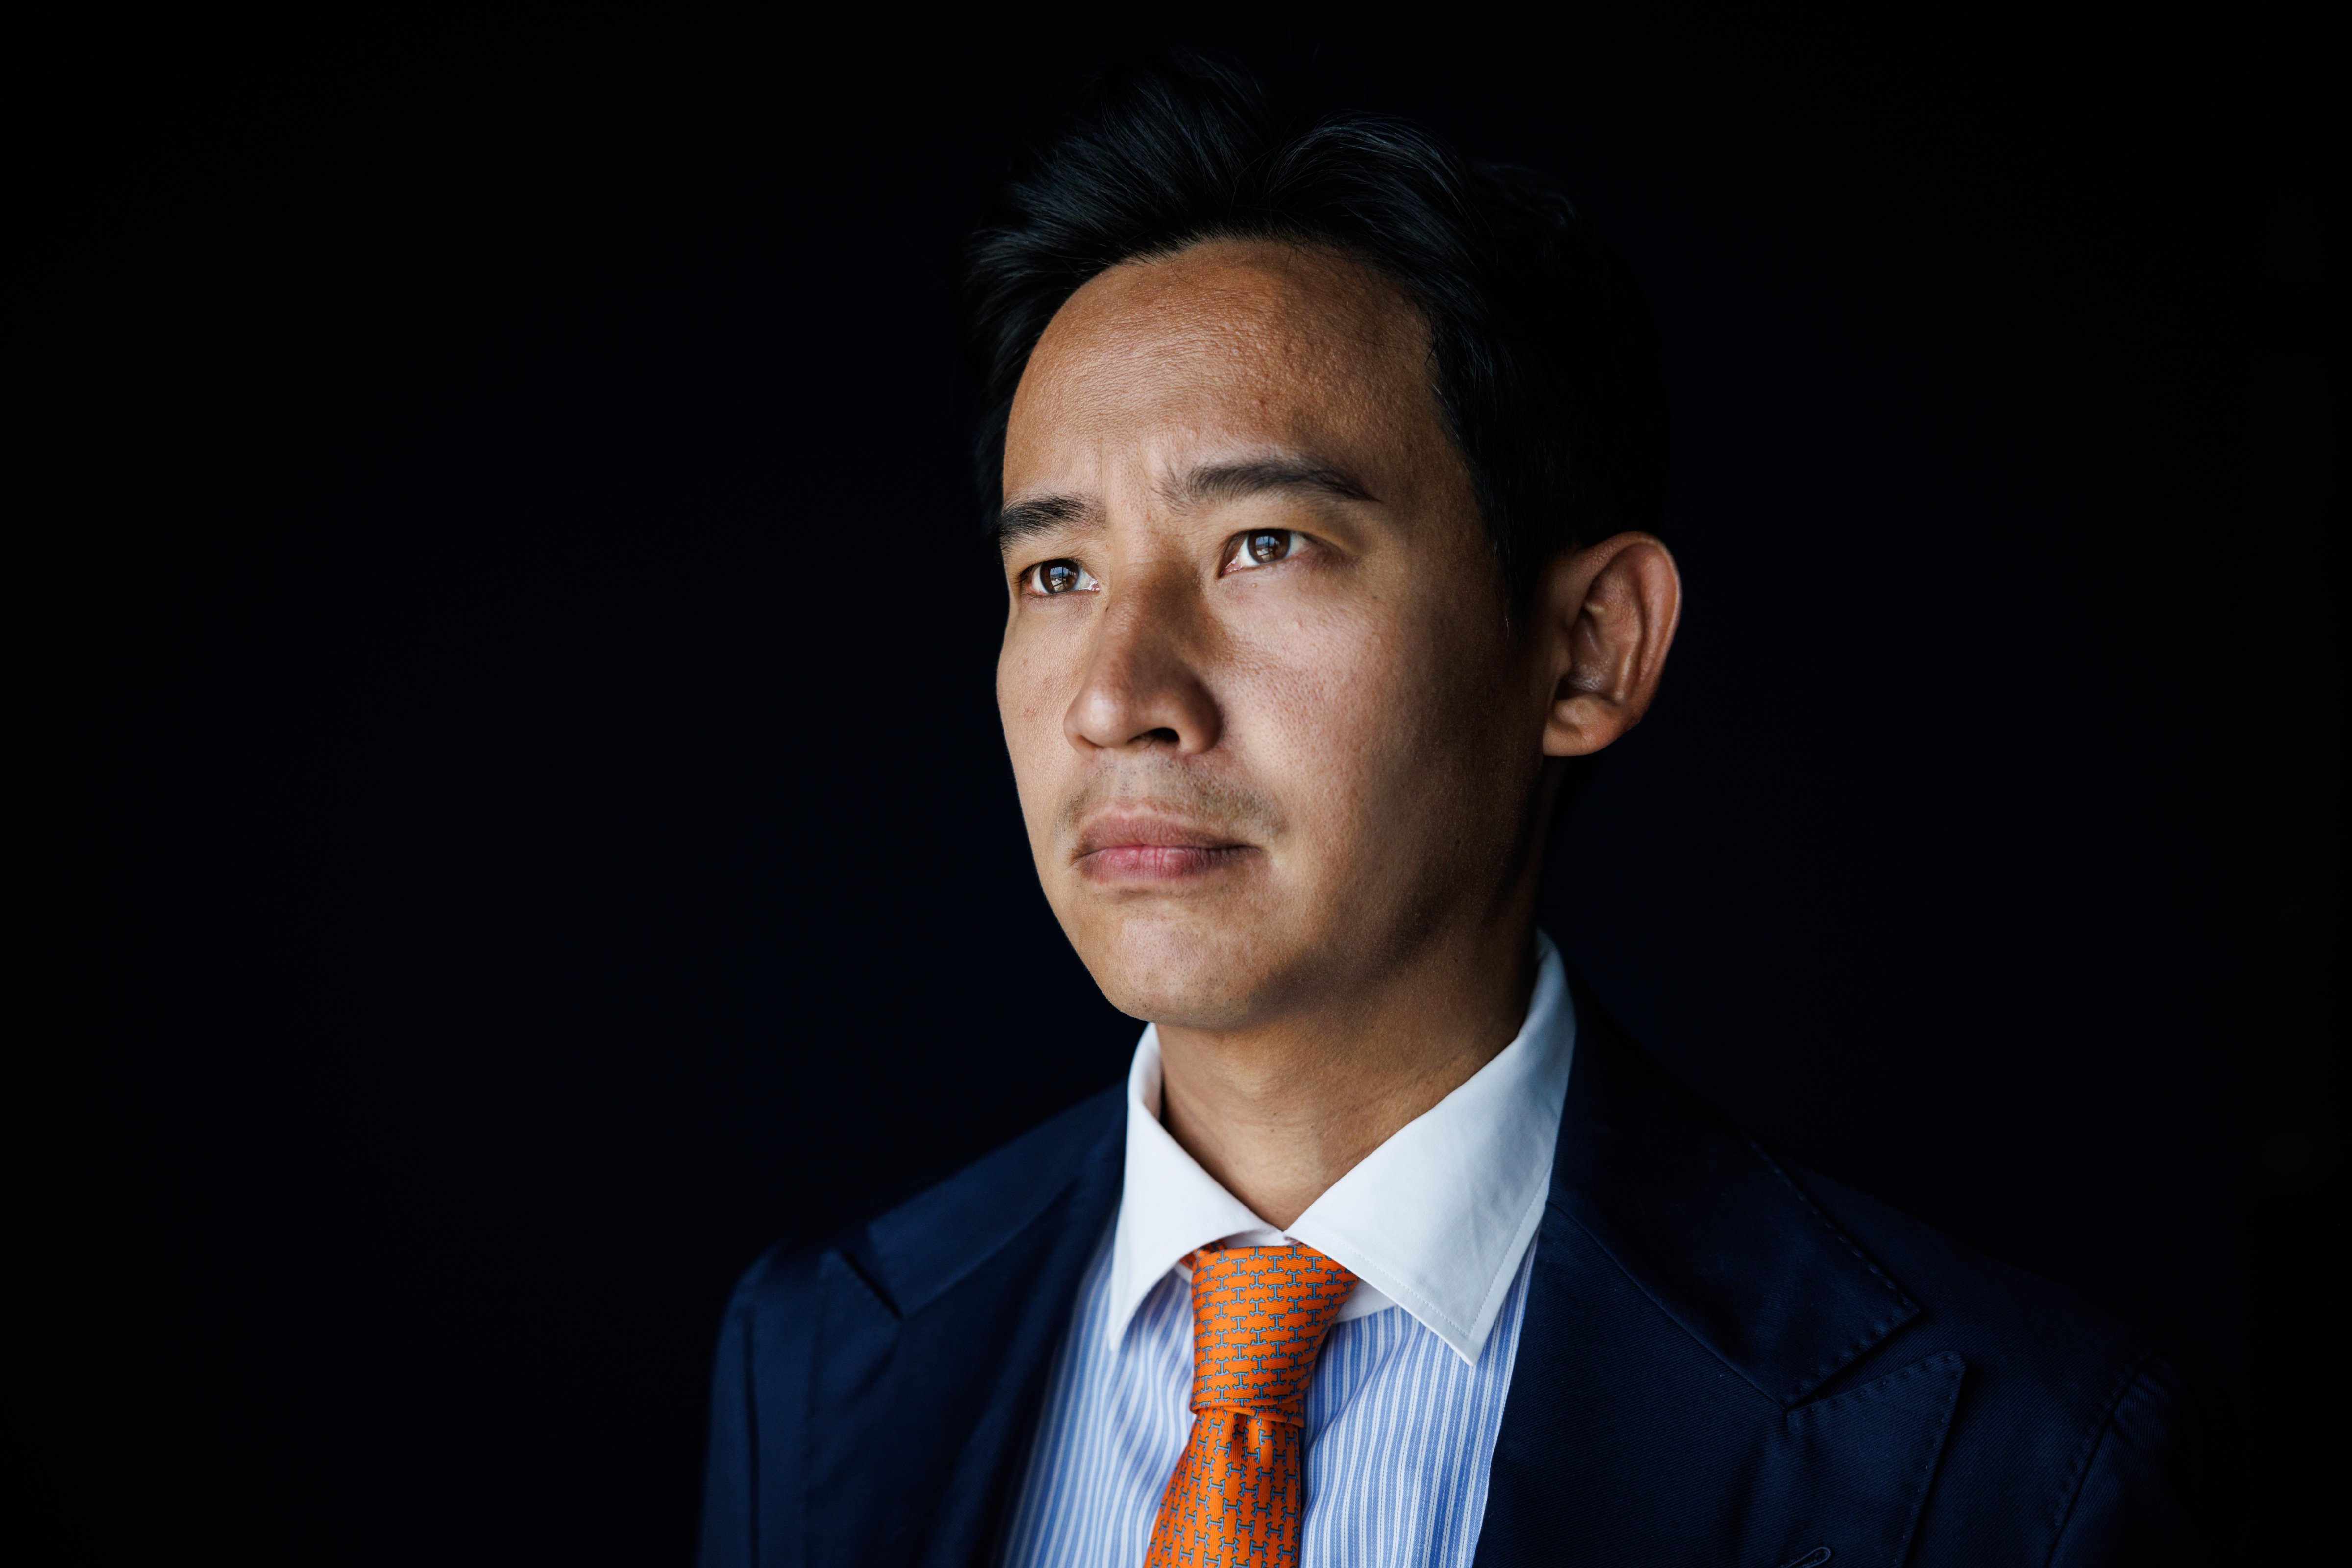 Pita Limjaroenrat, leader of Thailand’s progressive Move Forward Party, at the party headquarters in Bangkok on April 19, 2023. (Andre Malerba—Bloomberg/Getty Images)